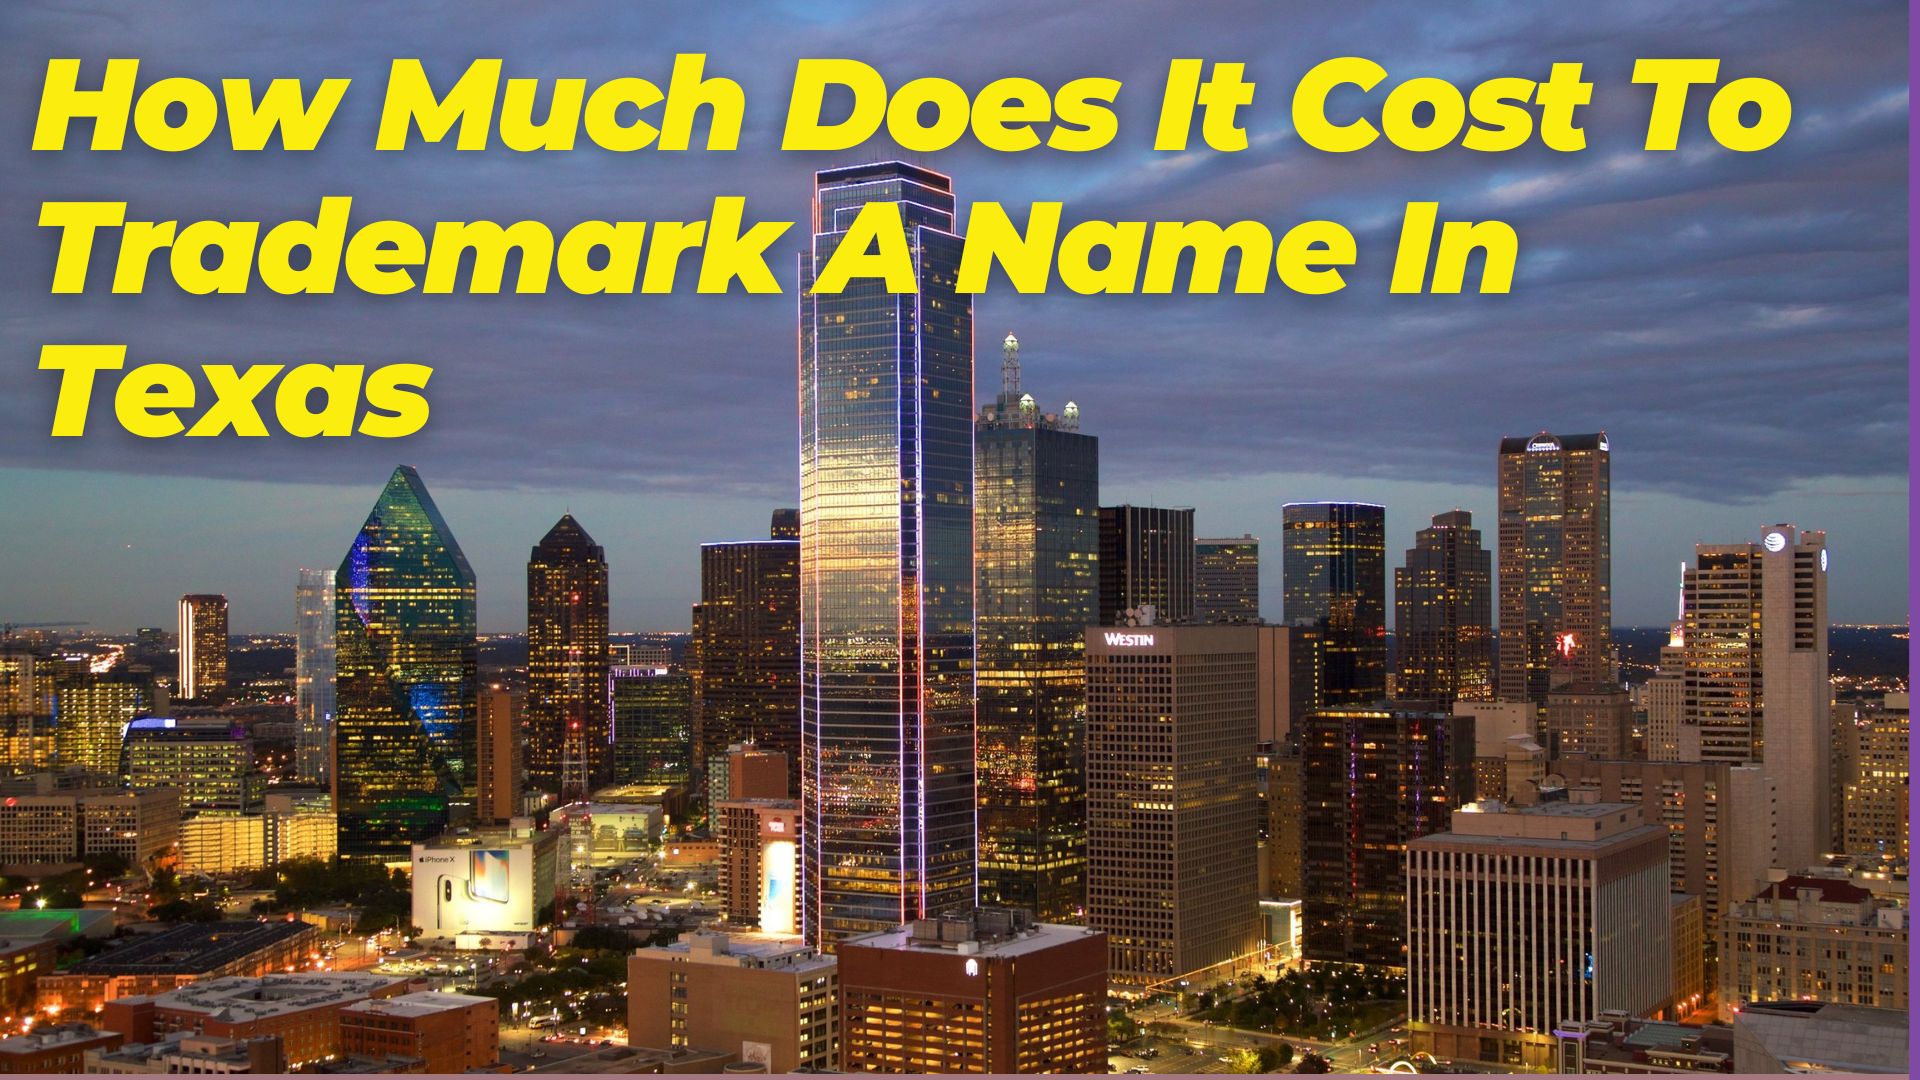 How Much Does It Cost To Trademark A Name In Texas